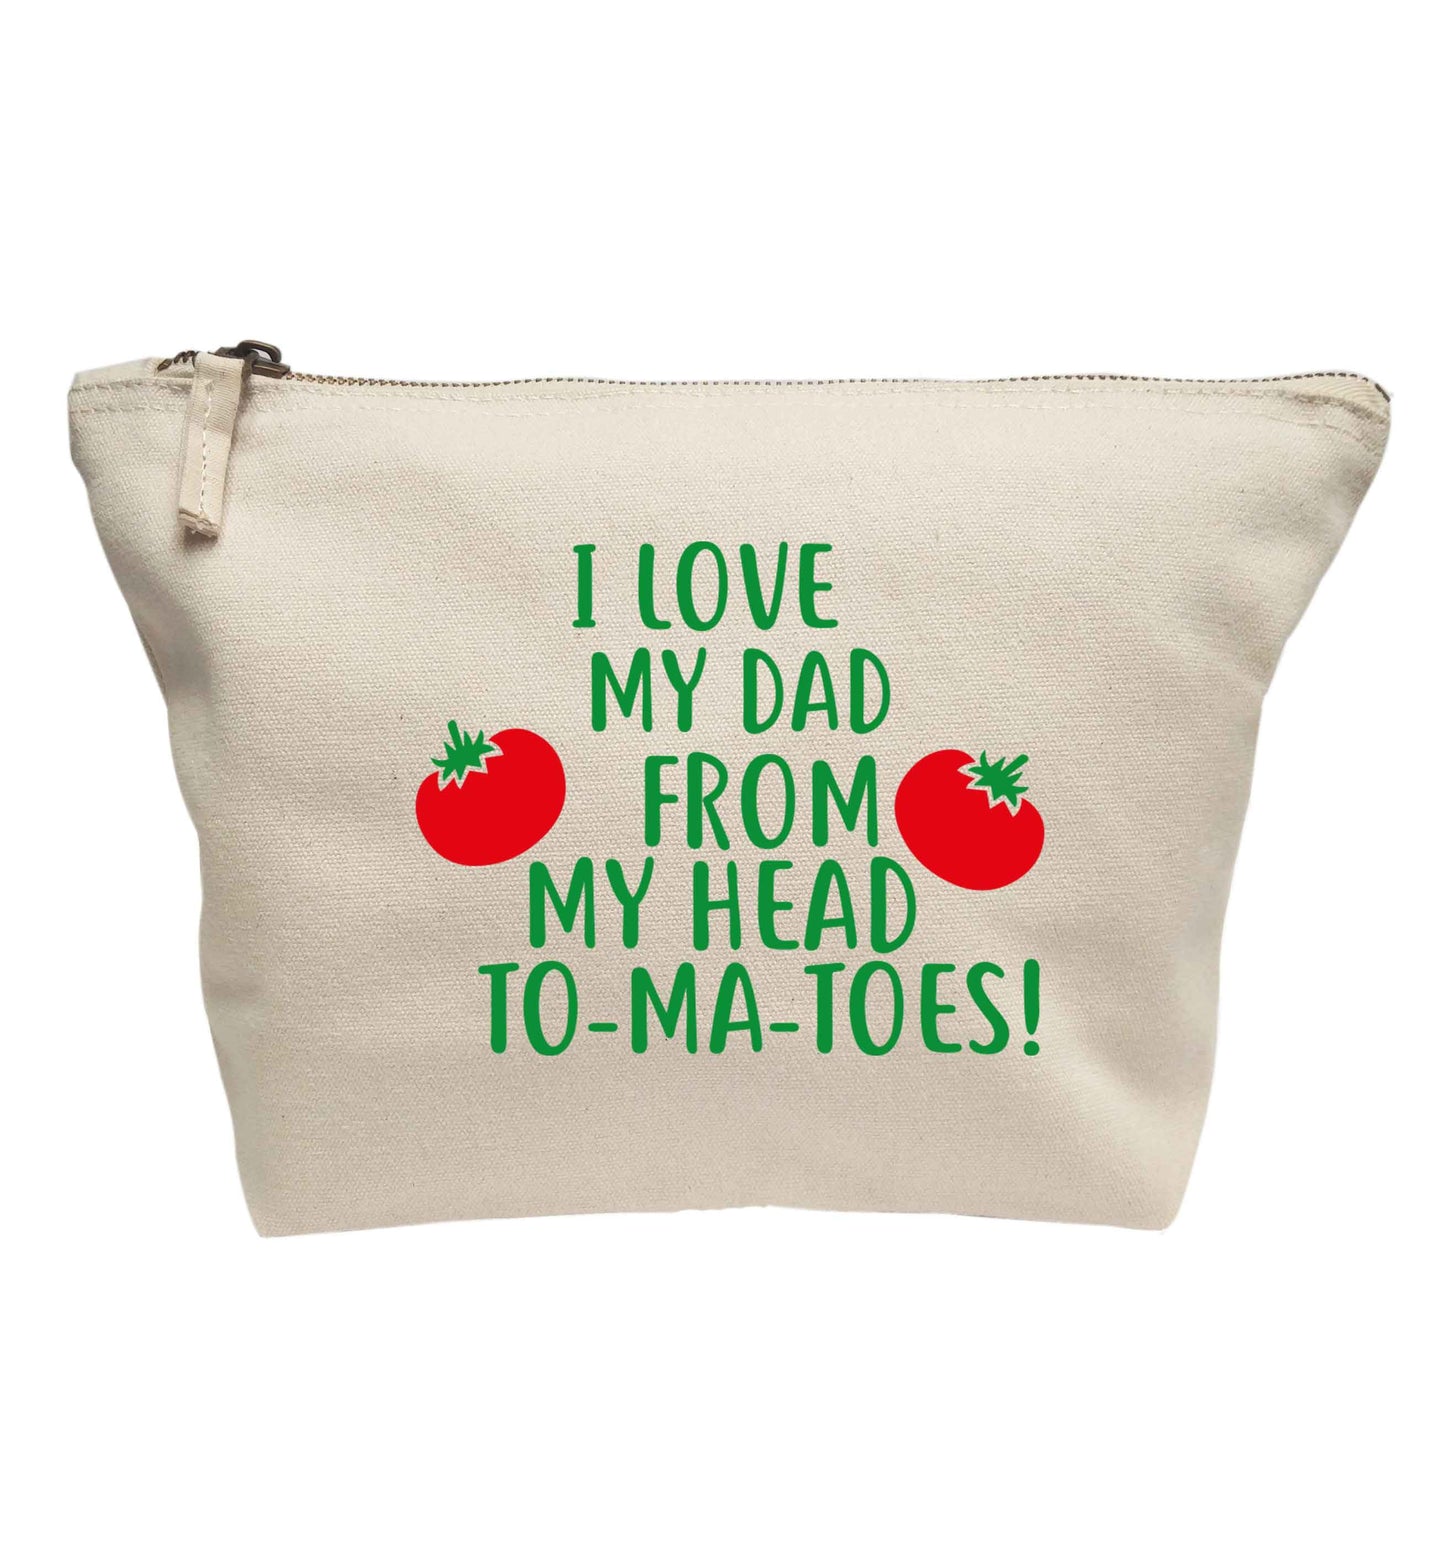 I love my dad from my head to-ma-toes | Makeup / wash bag